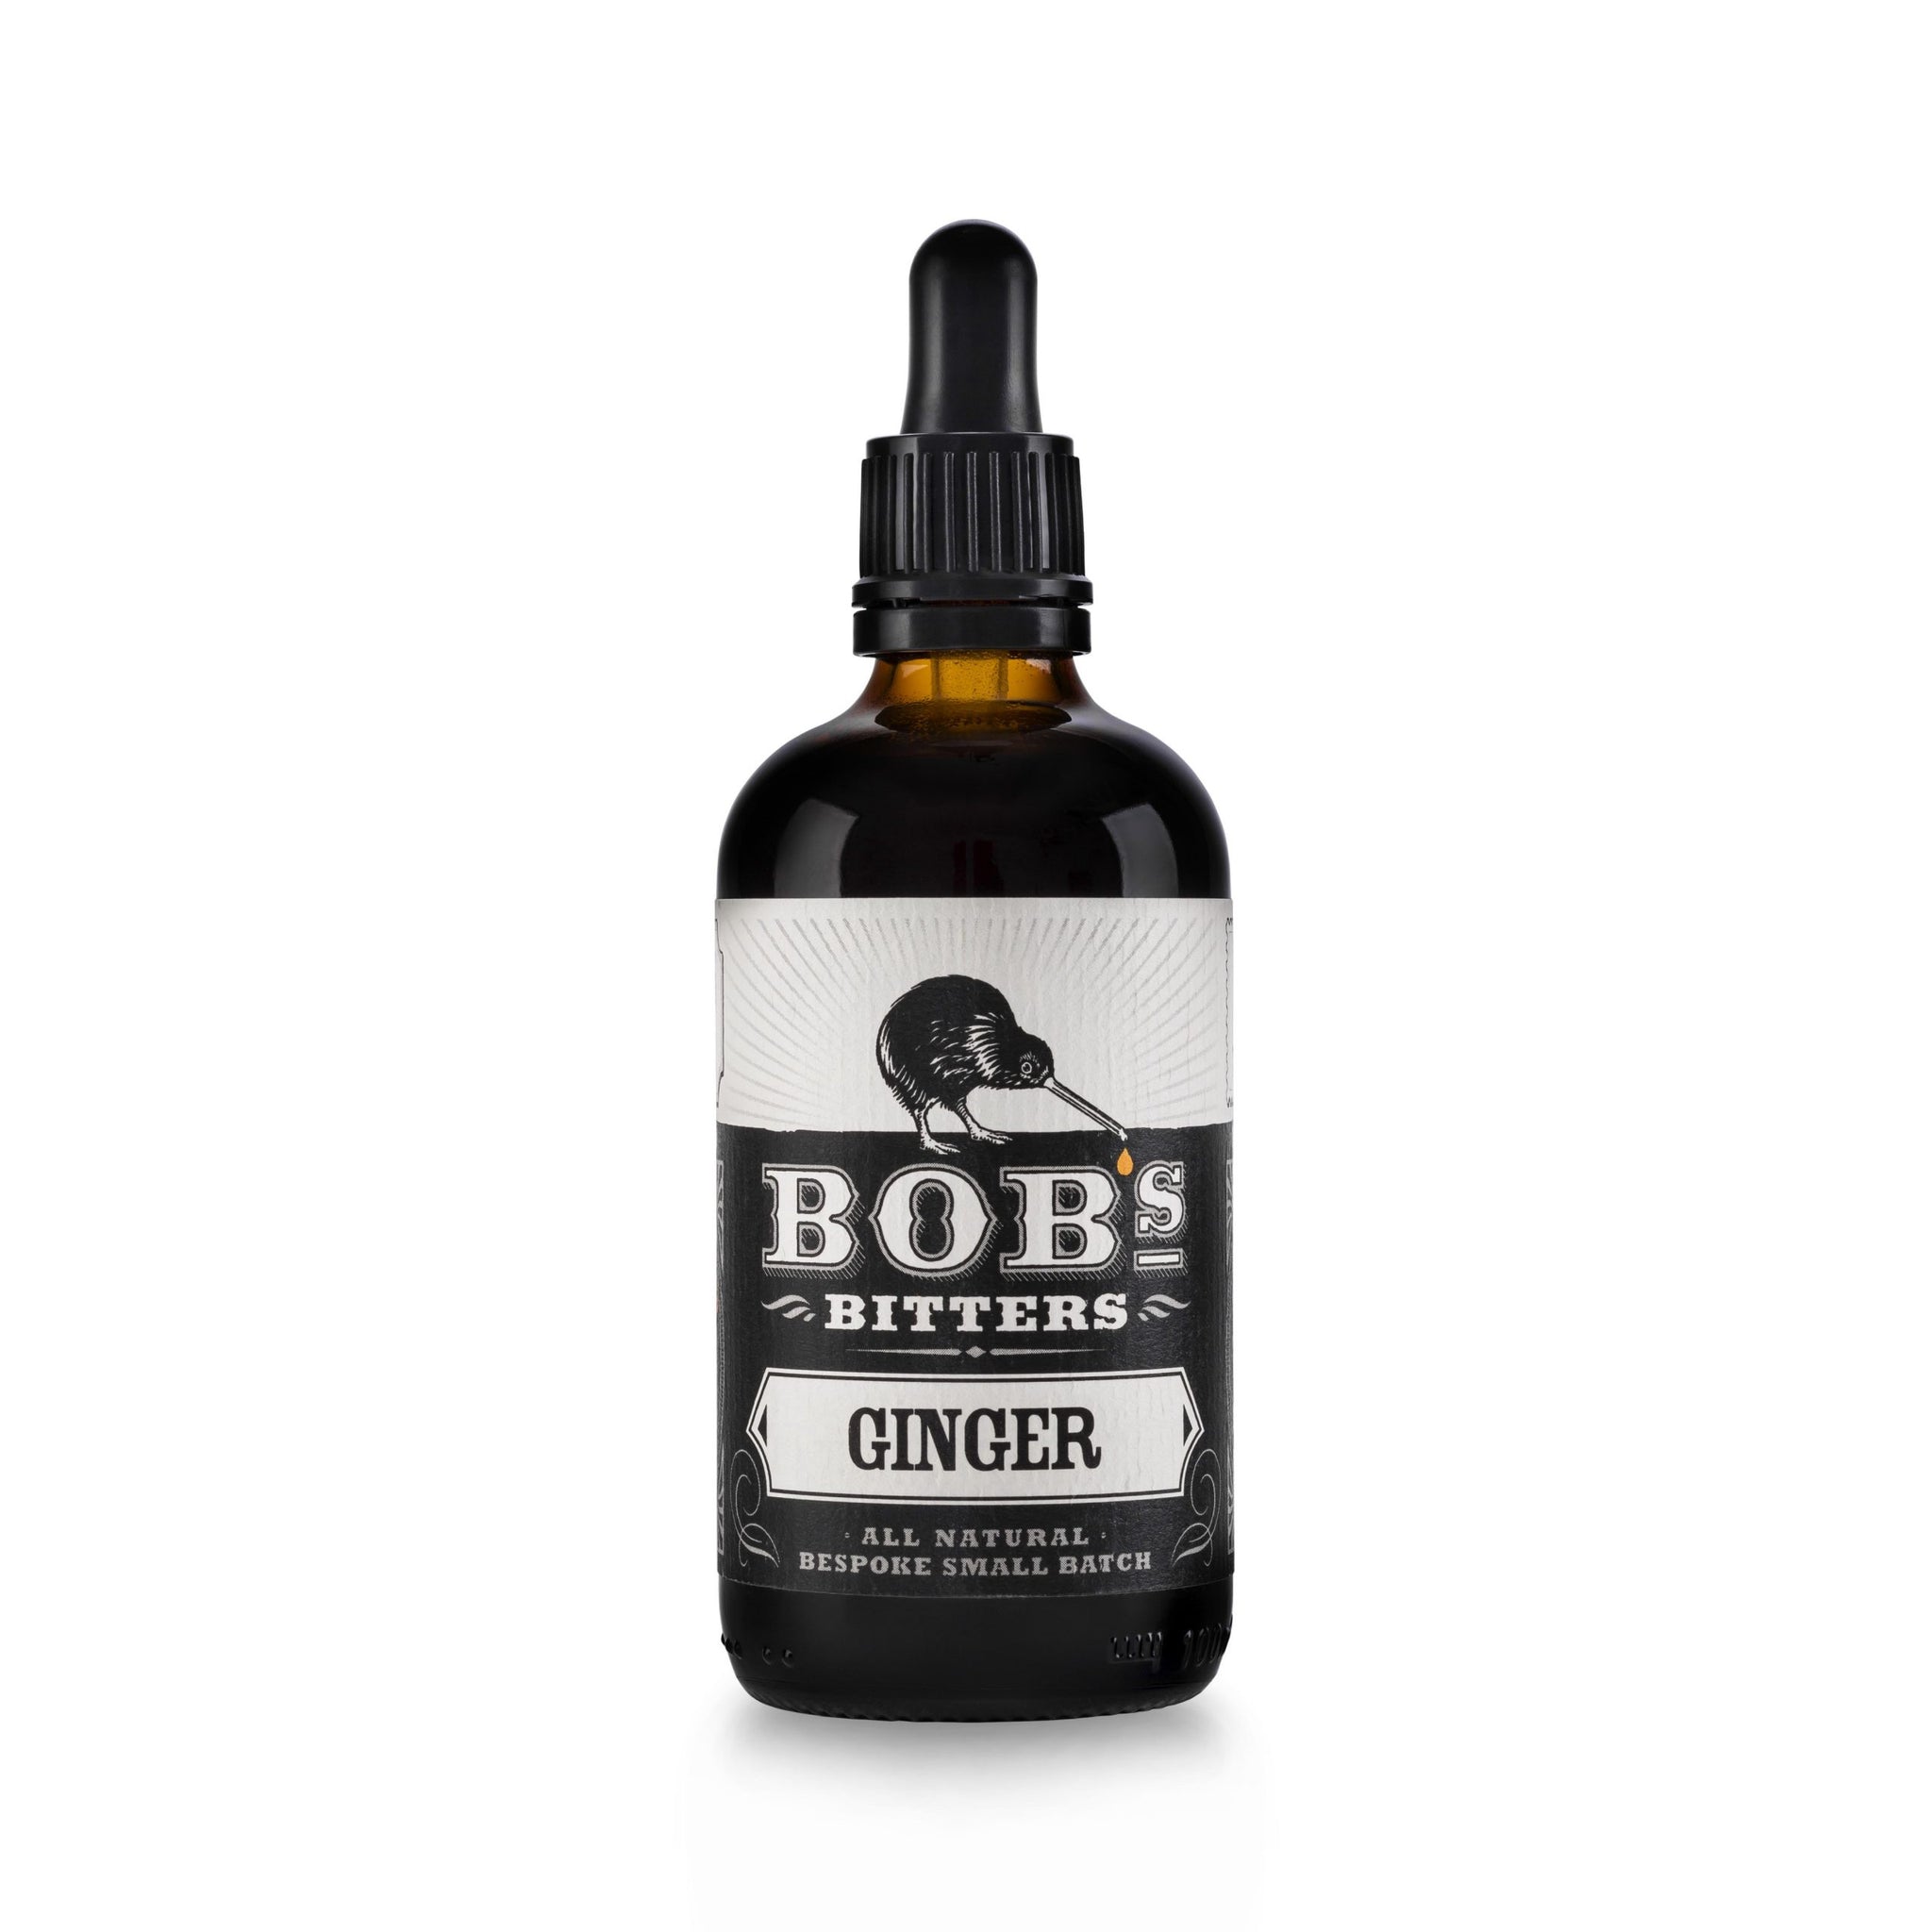 Bob's Ginger Bitters - 10cl